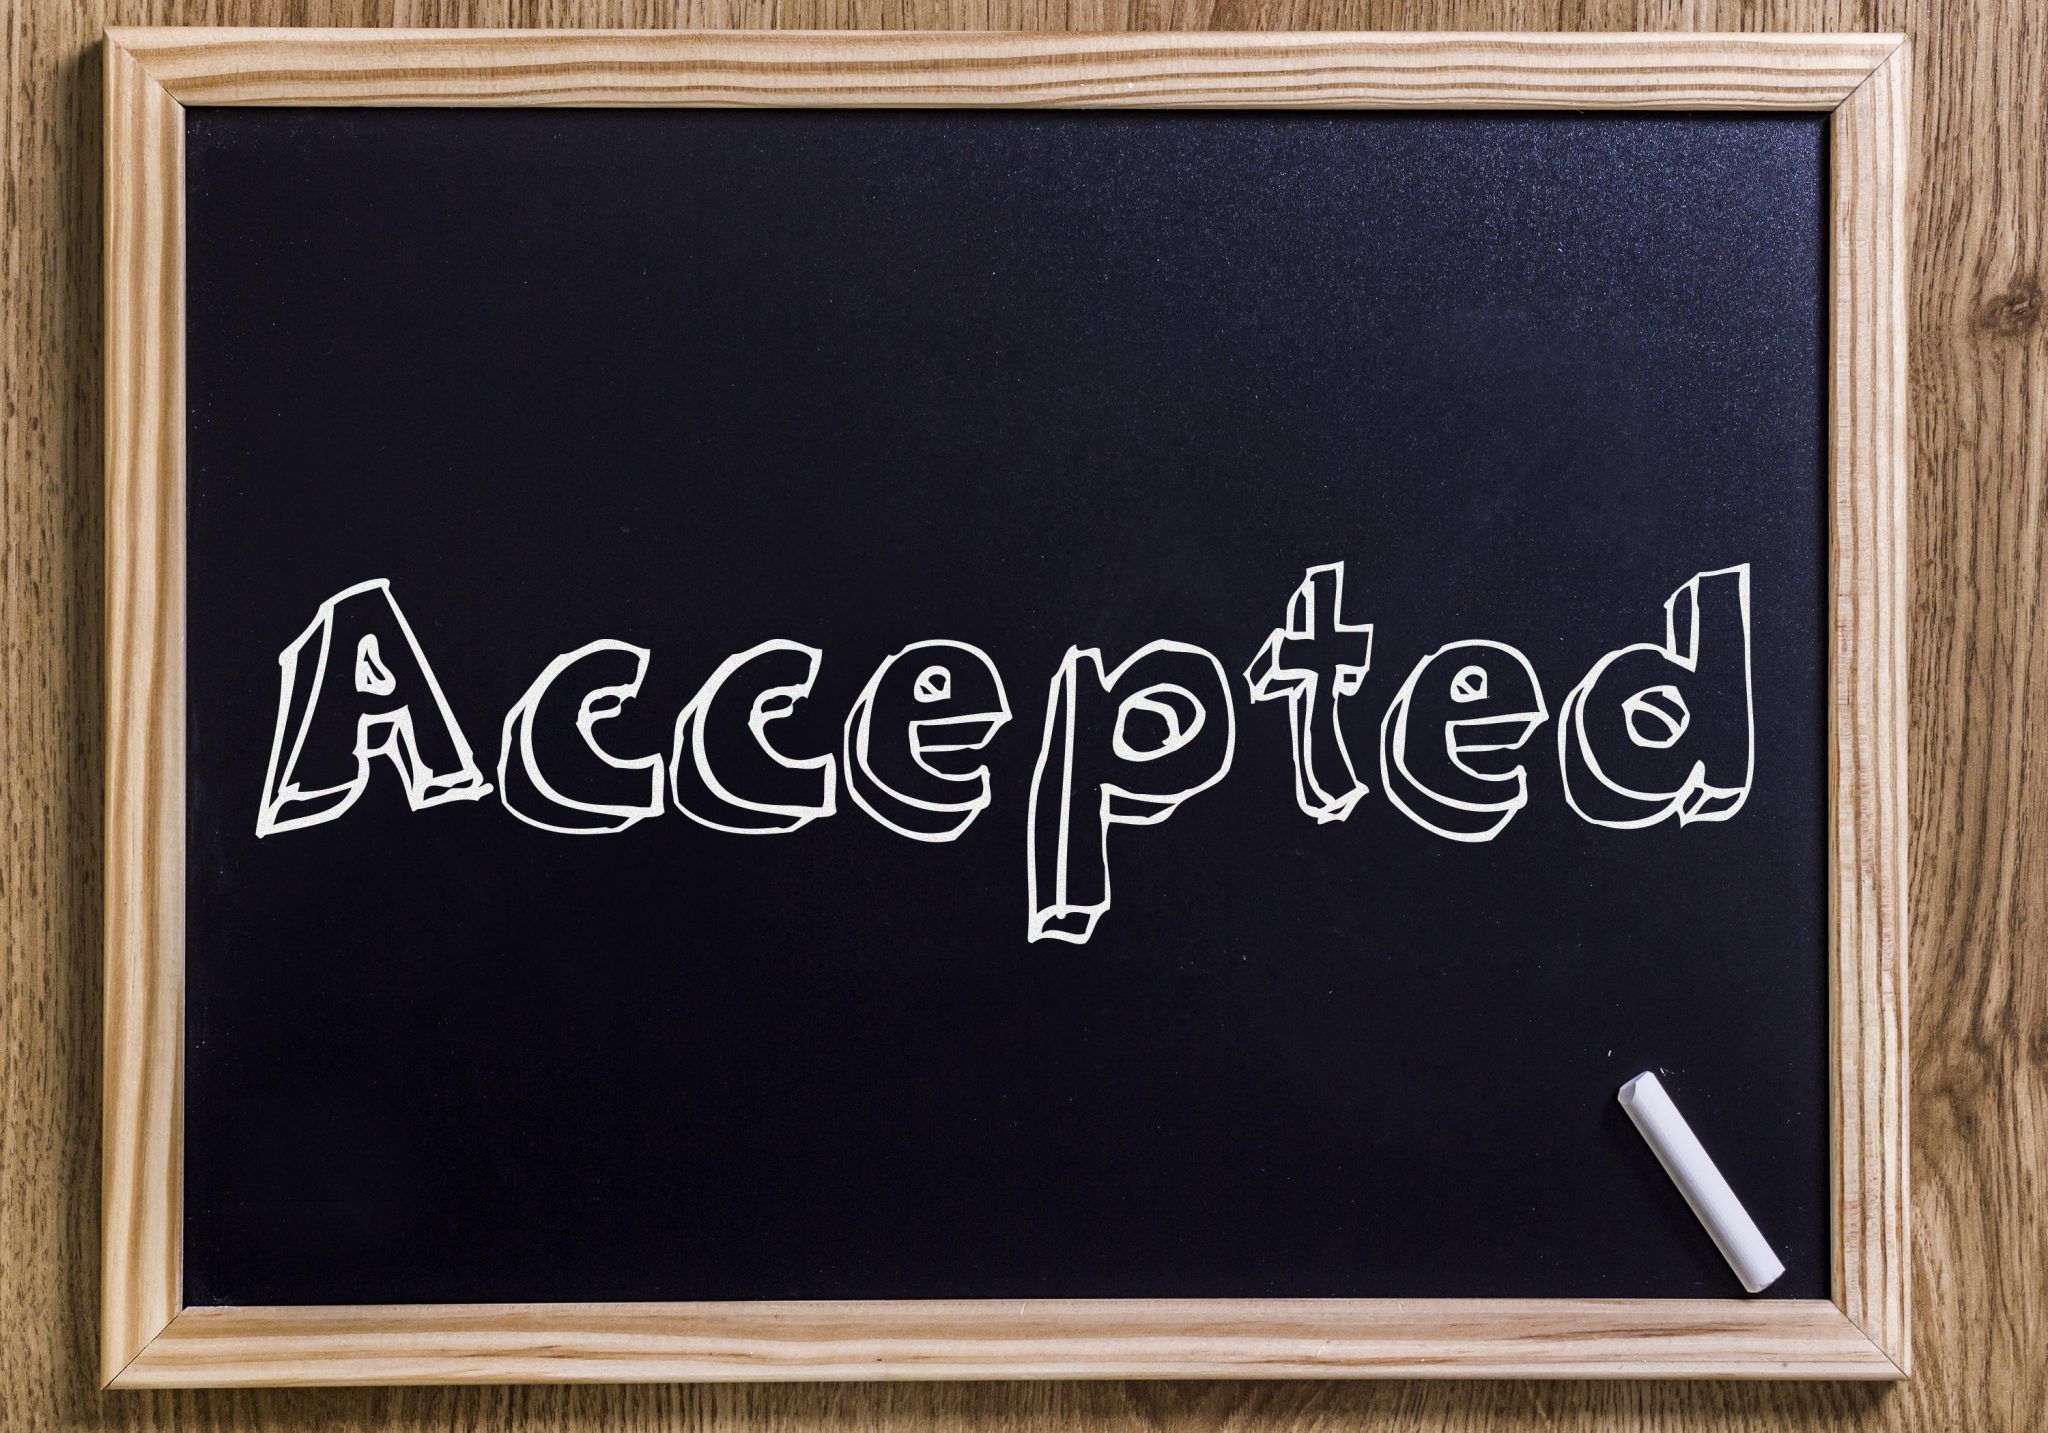 Does Your High School Matter When It Comes to College Acceptance?